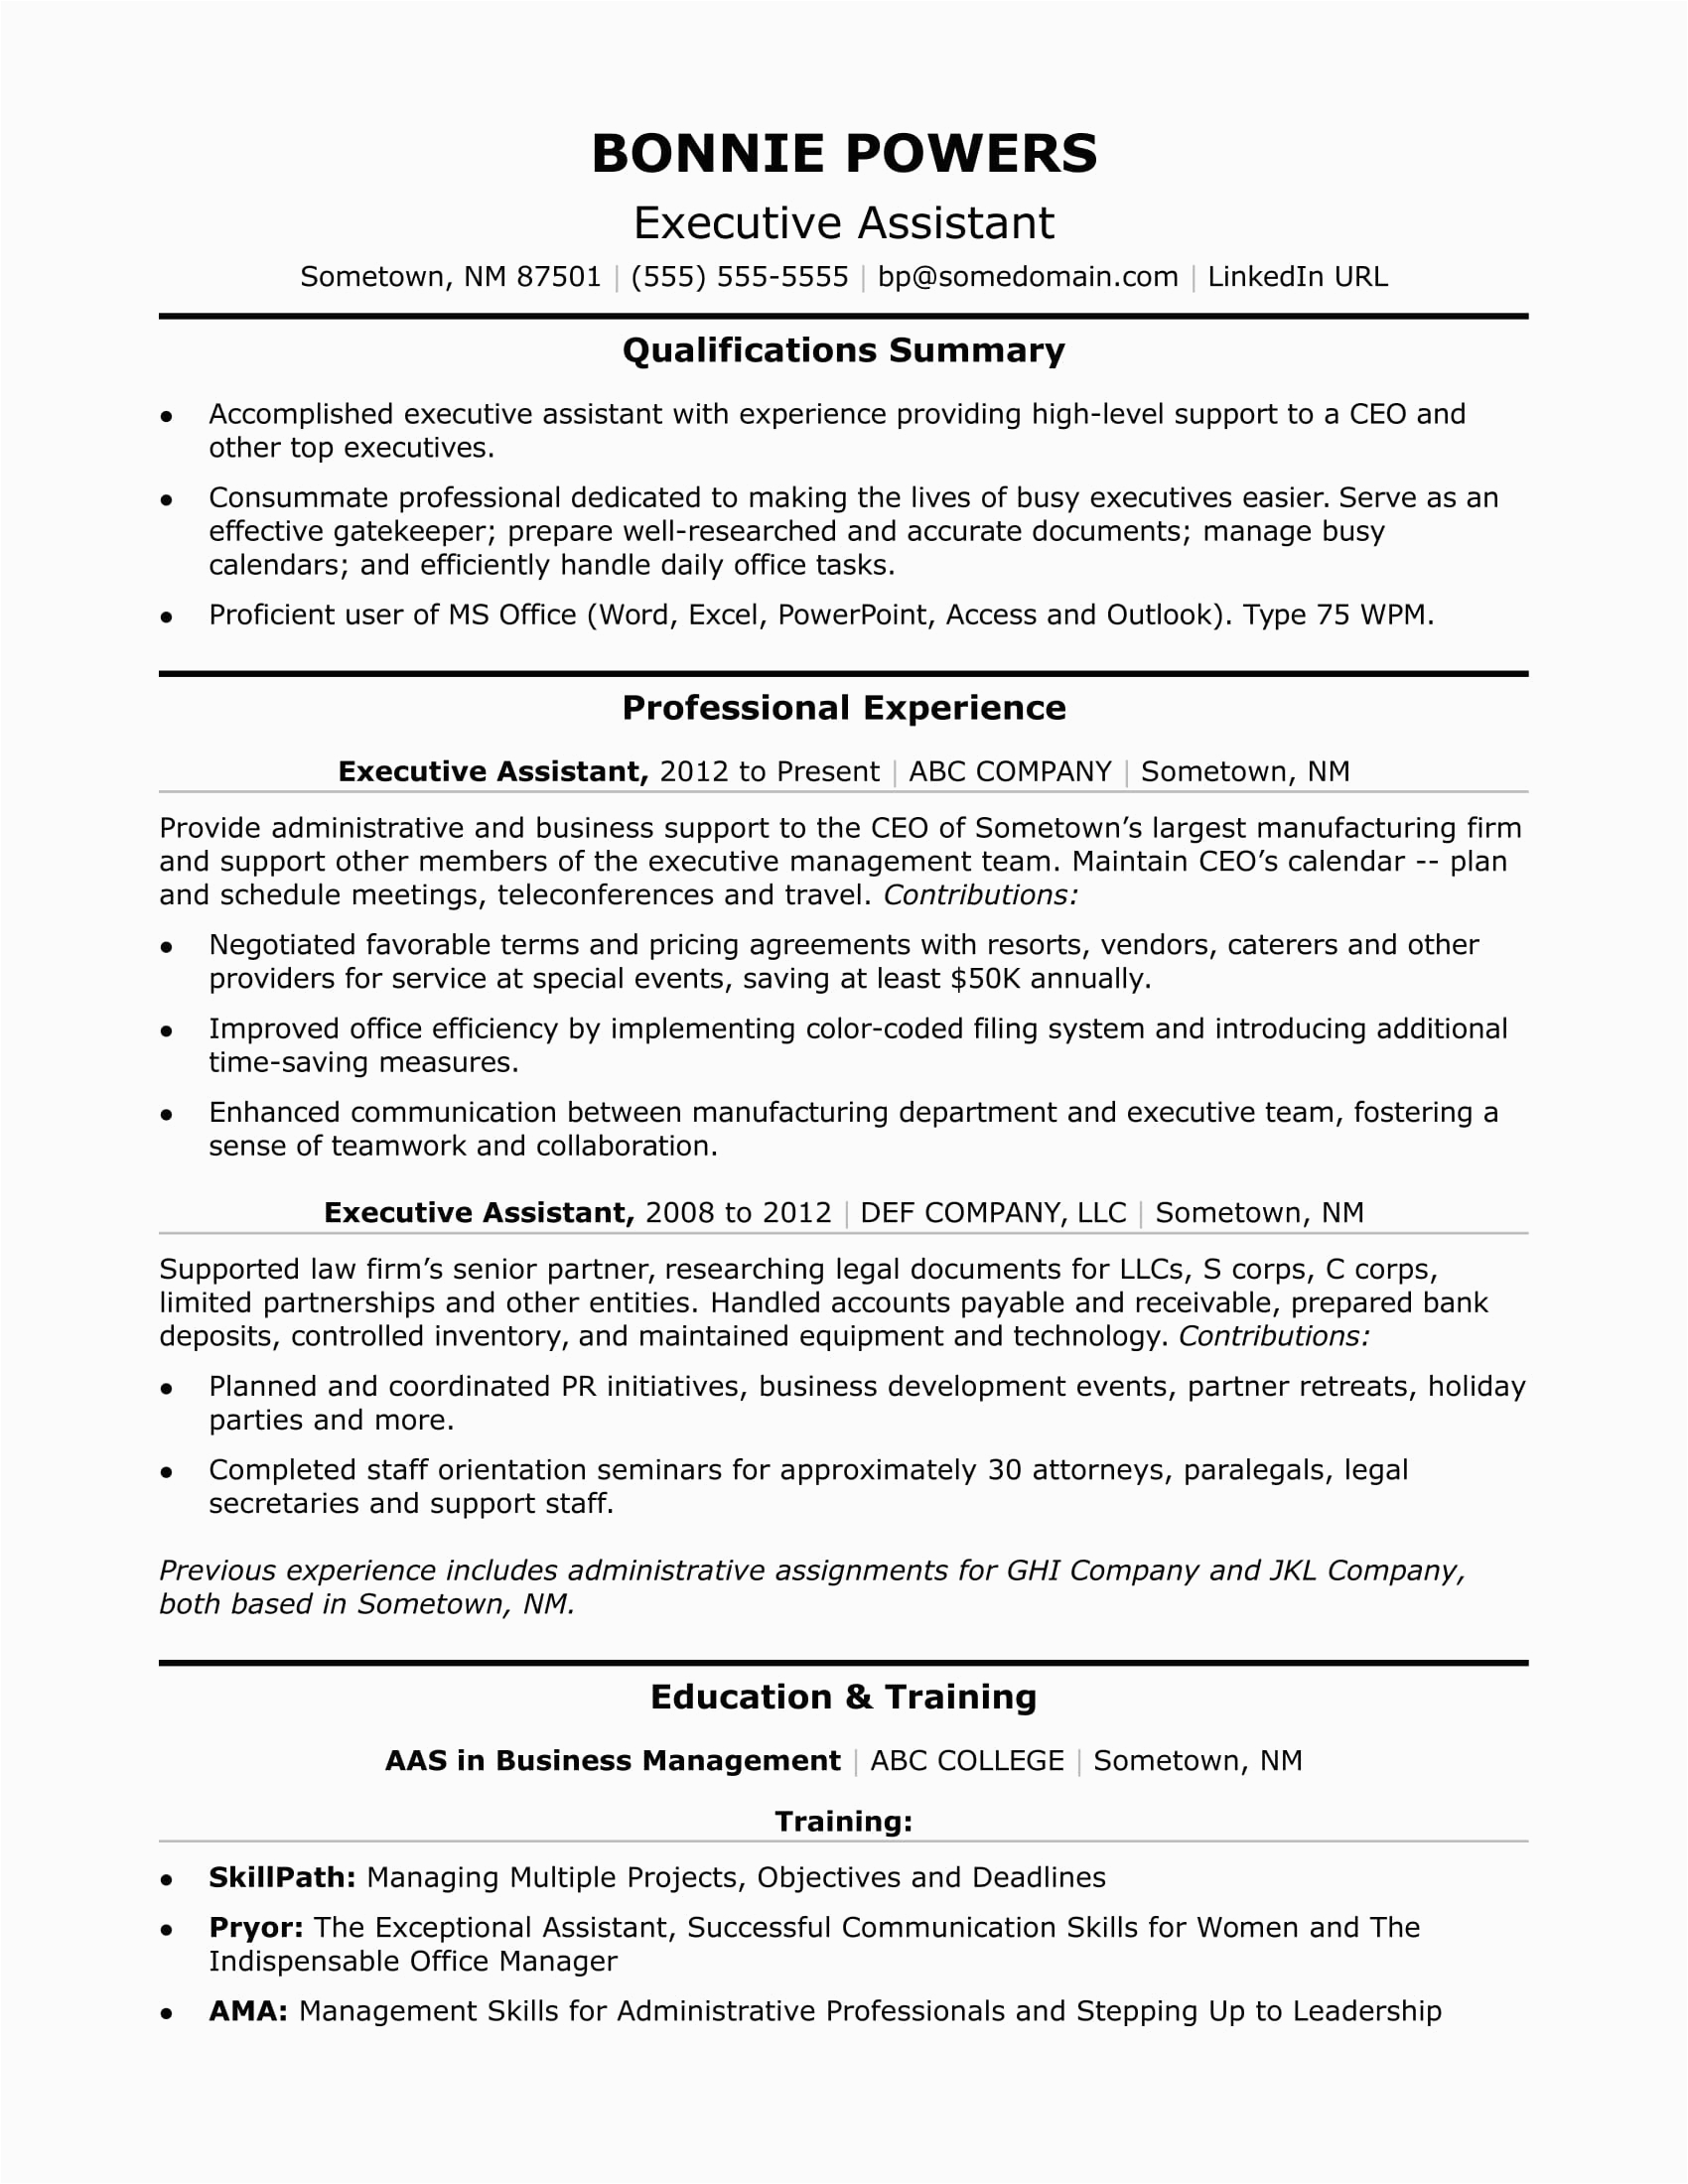 Sample Resume for Executive assistant to President Executive Administrative assistant Resume Sample